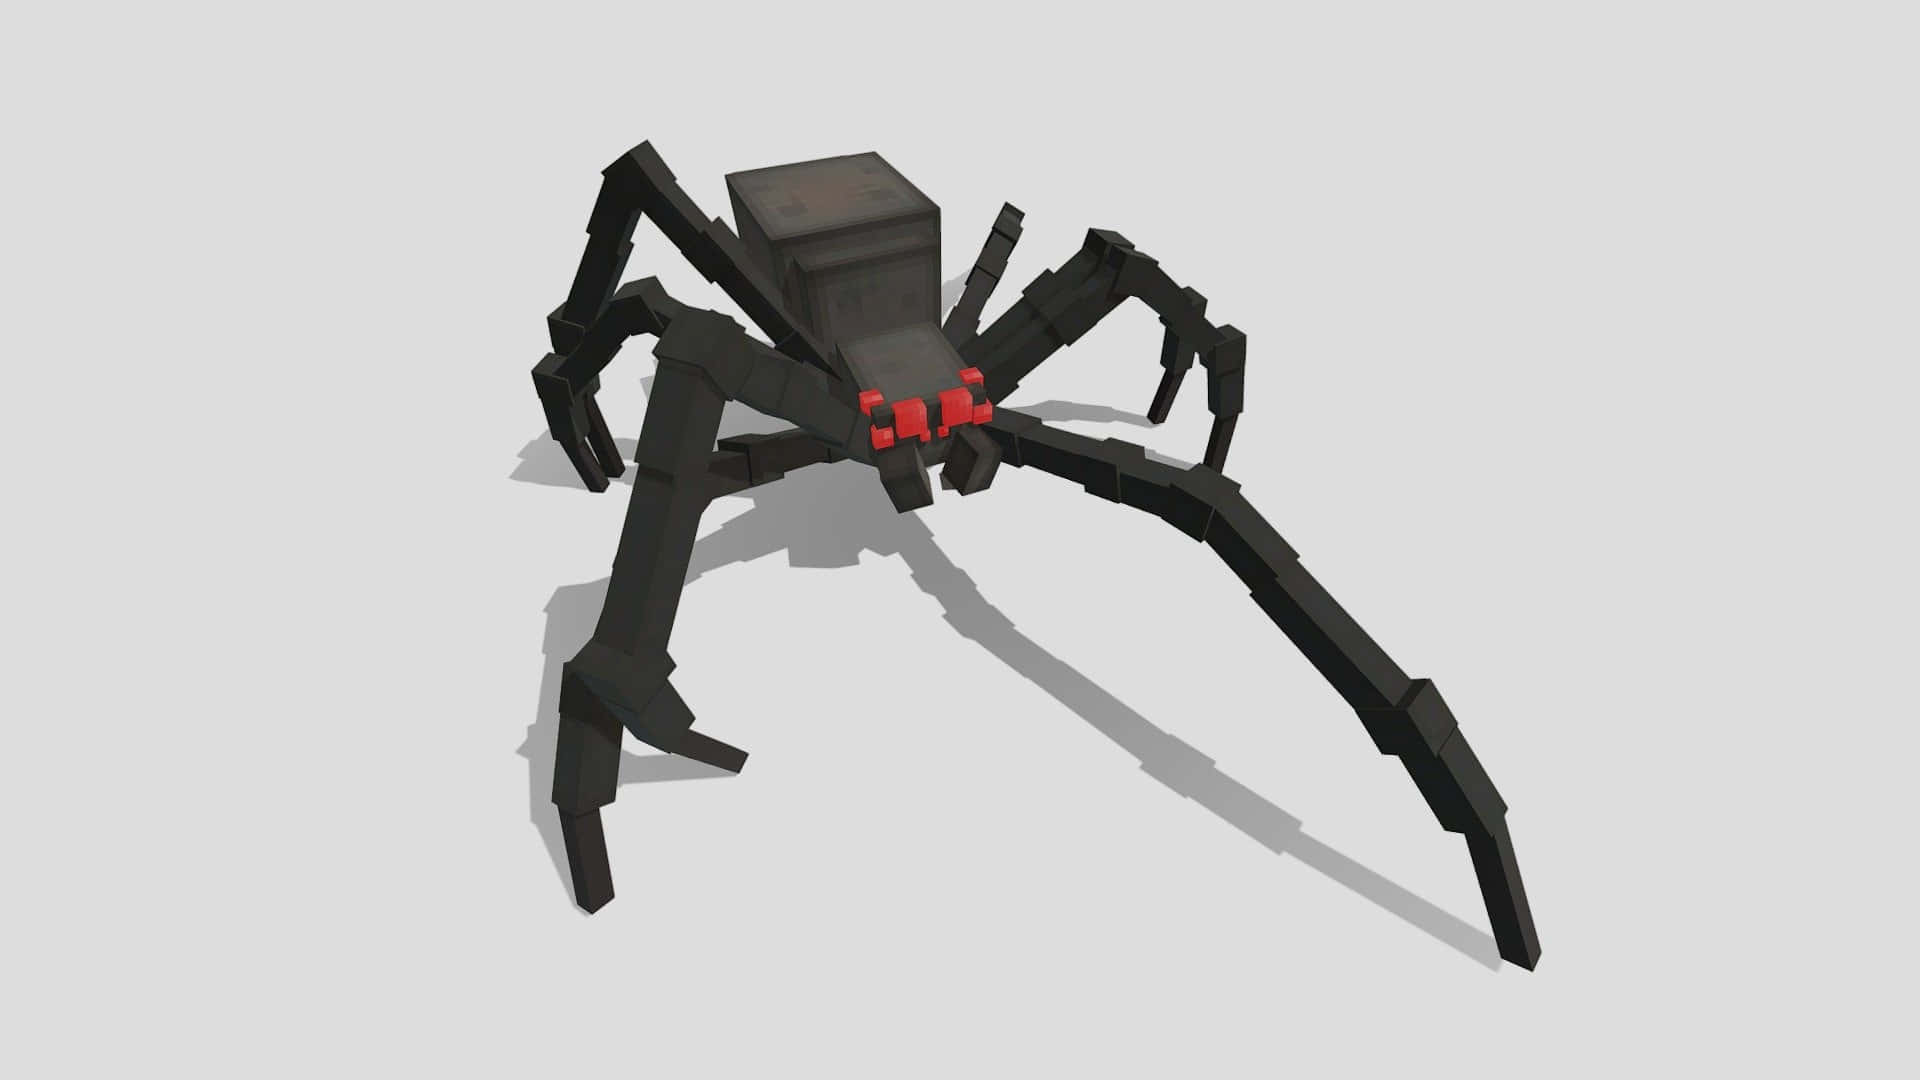 Caption: A Fearsome Minecraft Spider in Action Wallpaper